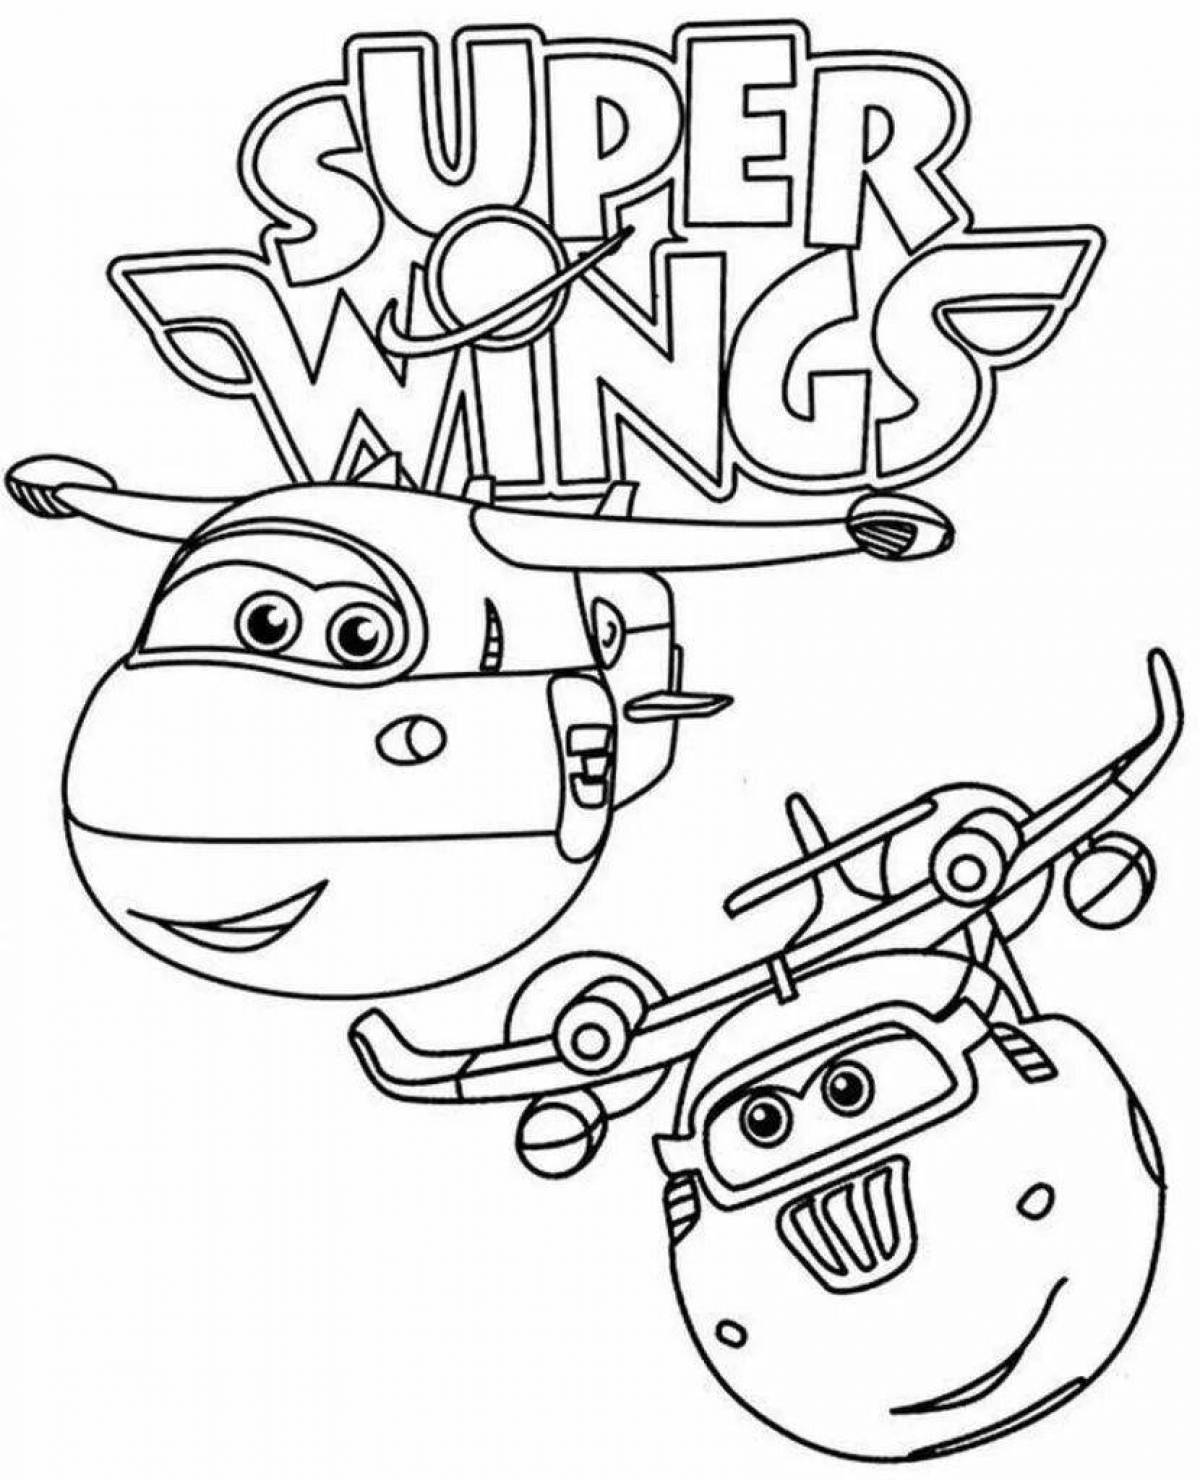 Charming crystal super wings coloring page